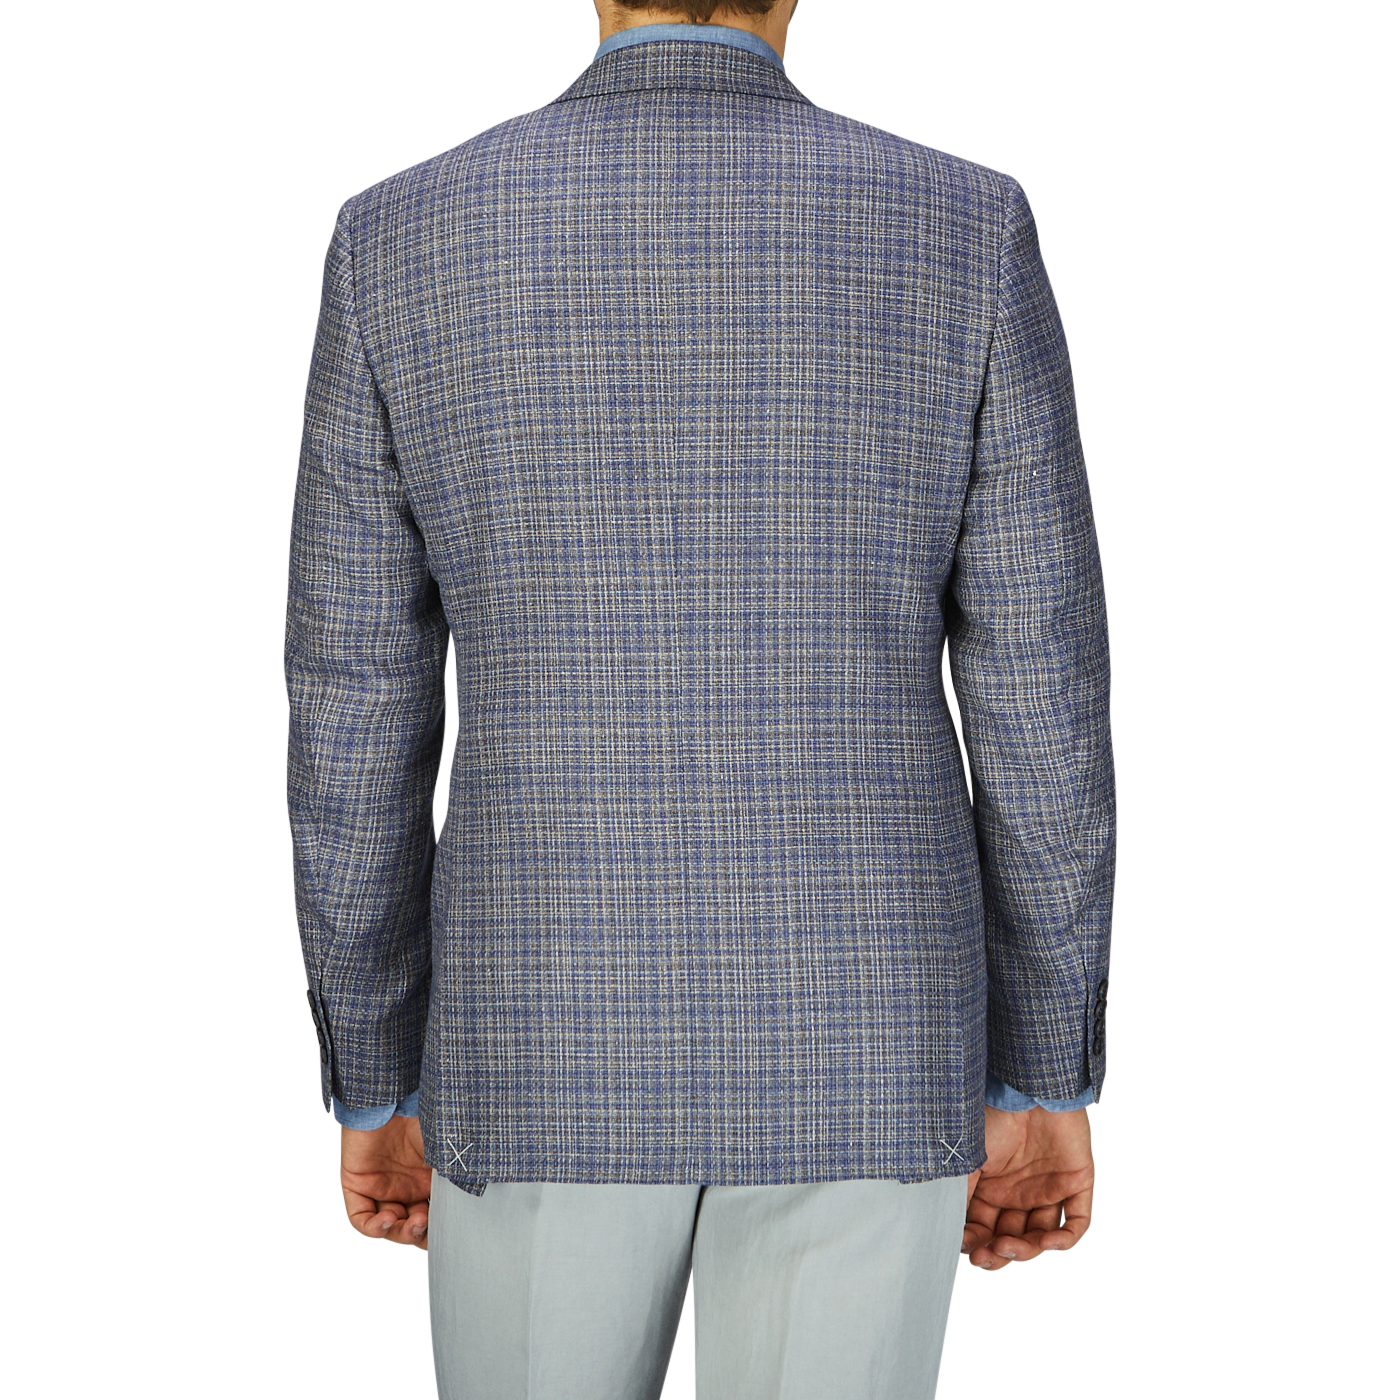 A man viewed from the back, wearing a Canali Blue Melange Silk Wool Basketweave Blazer and light-colored pants.